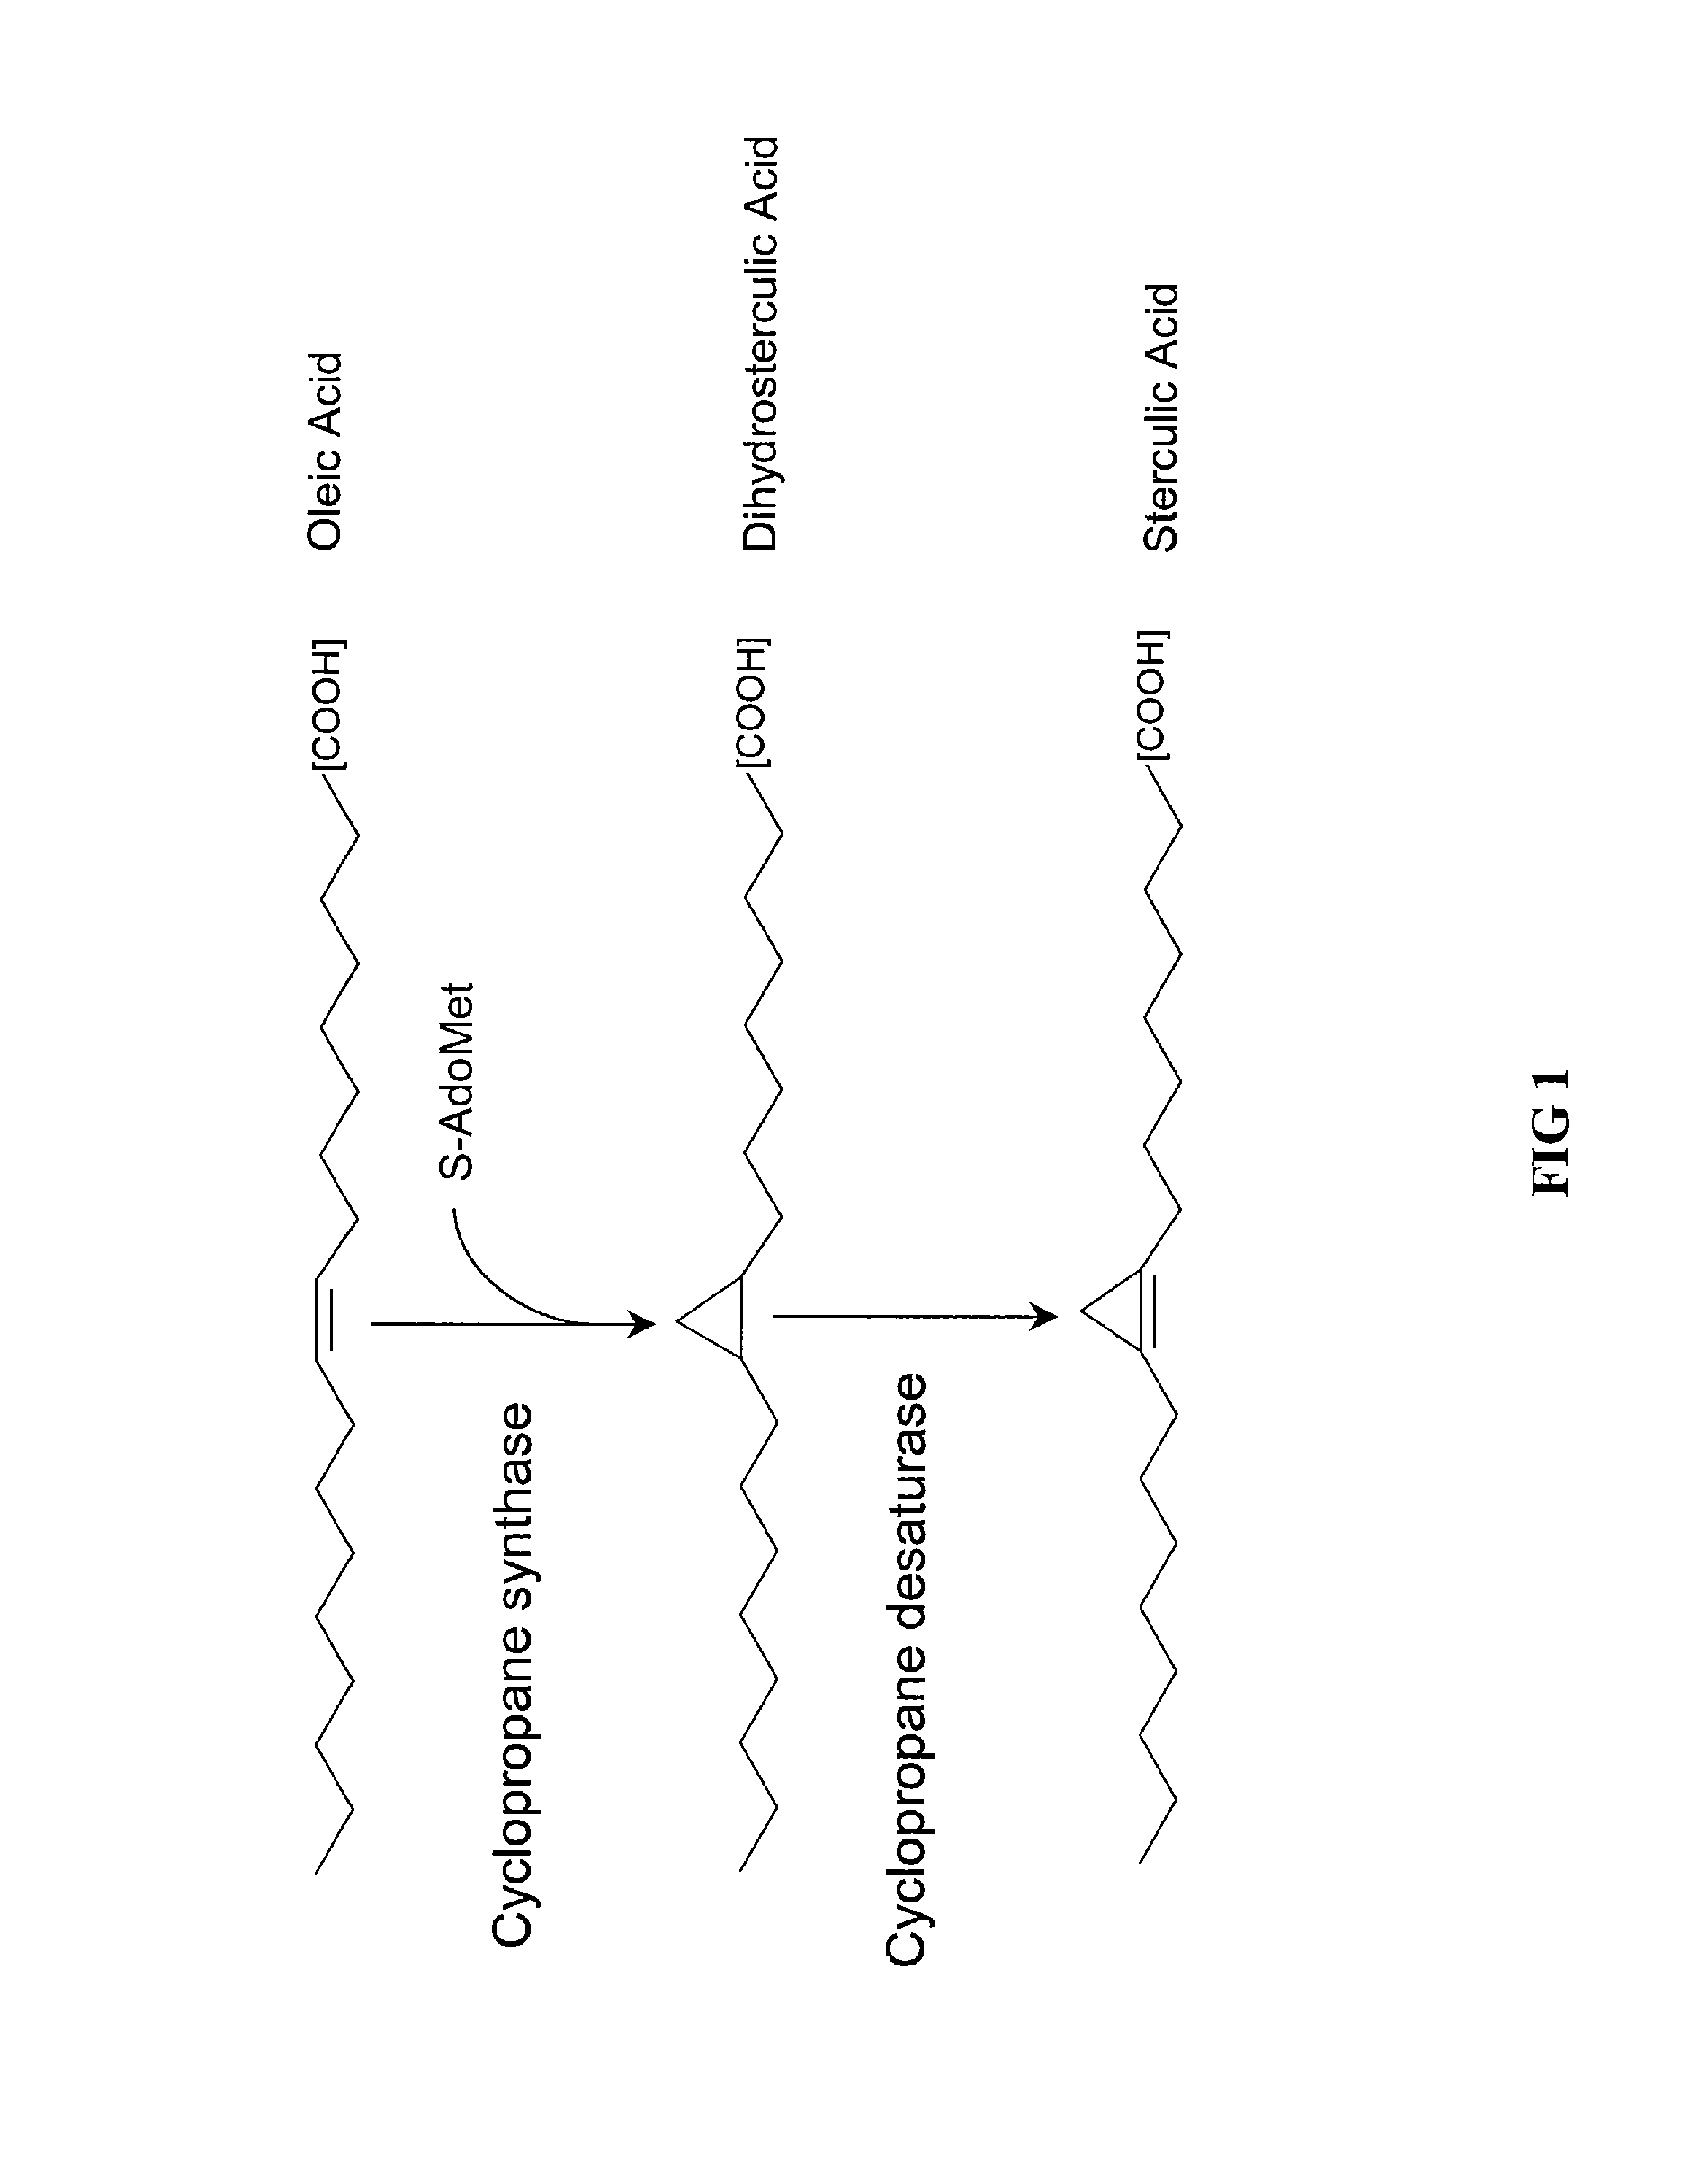 Plant cyclopropane fatty acid synthase genes, proteins, and uses thereof